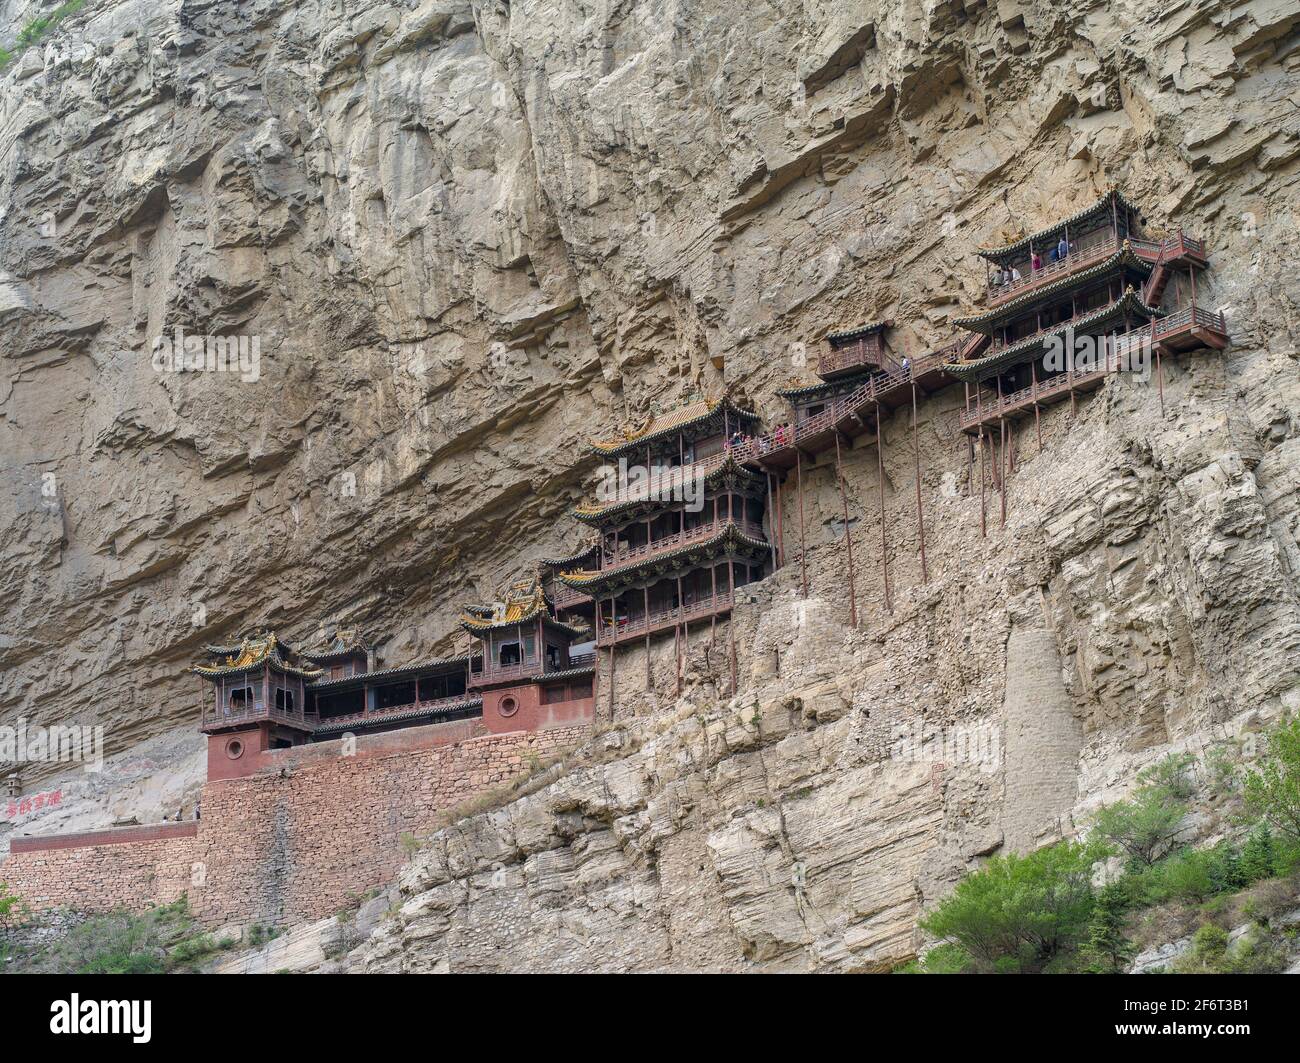 Built in 491, Hanging Monastery is an Architectural Wonder of the World, as it hangs on the West Cliff of Jinxia Gorge more than 50 meters above the Stock Photo